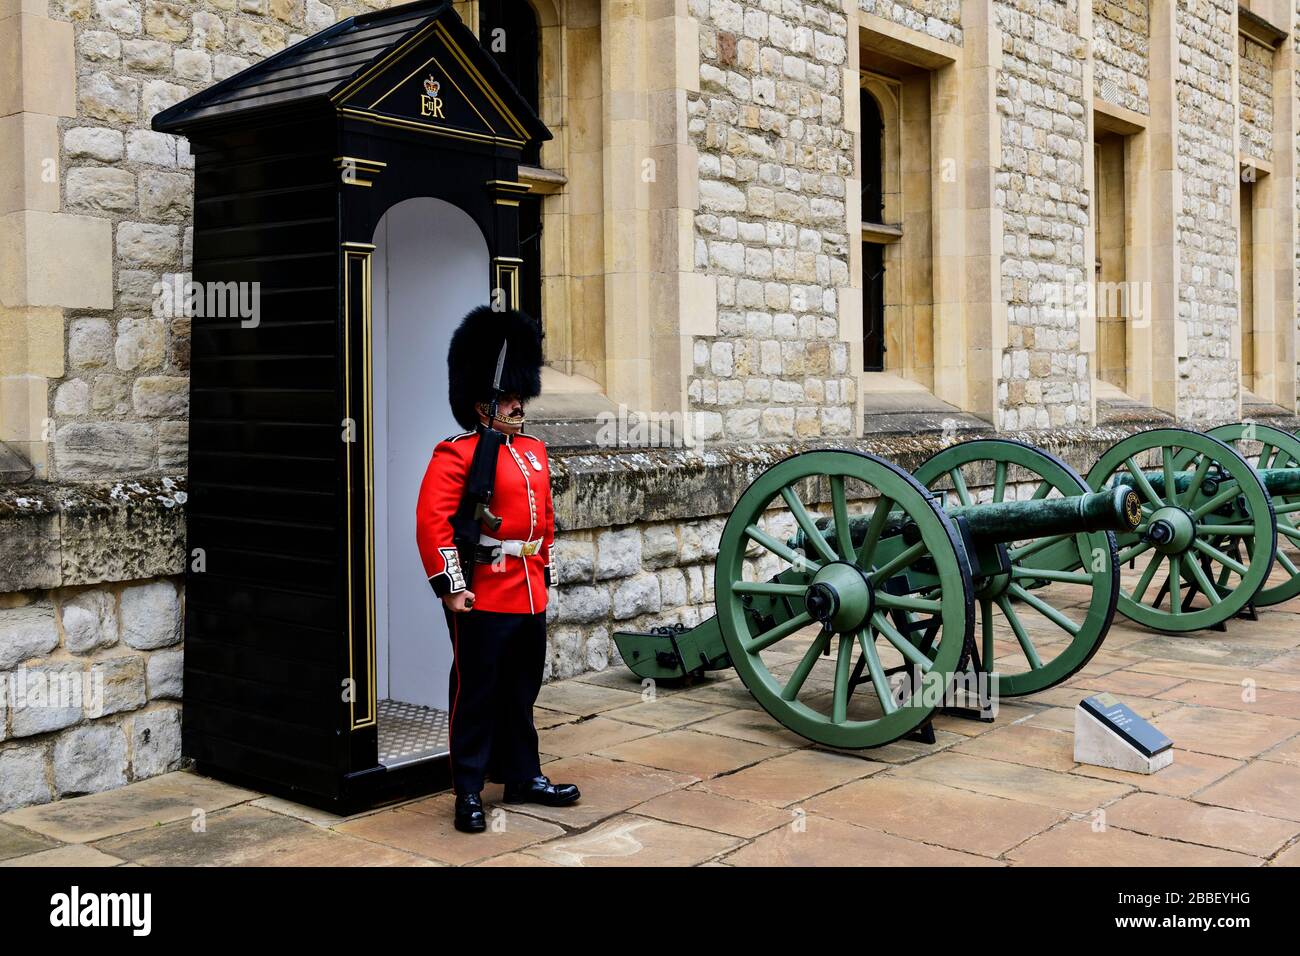 A Royal Guard and a small cannon inside the Tower of London in London, England Stock Photo